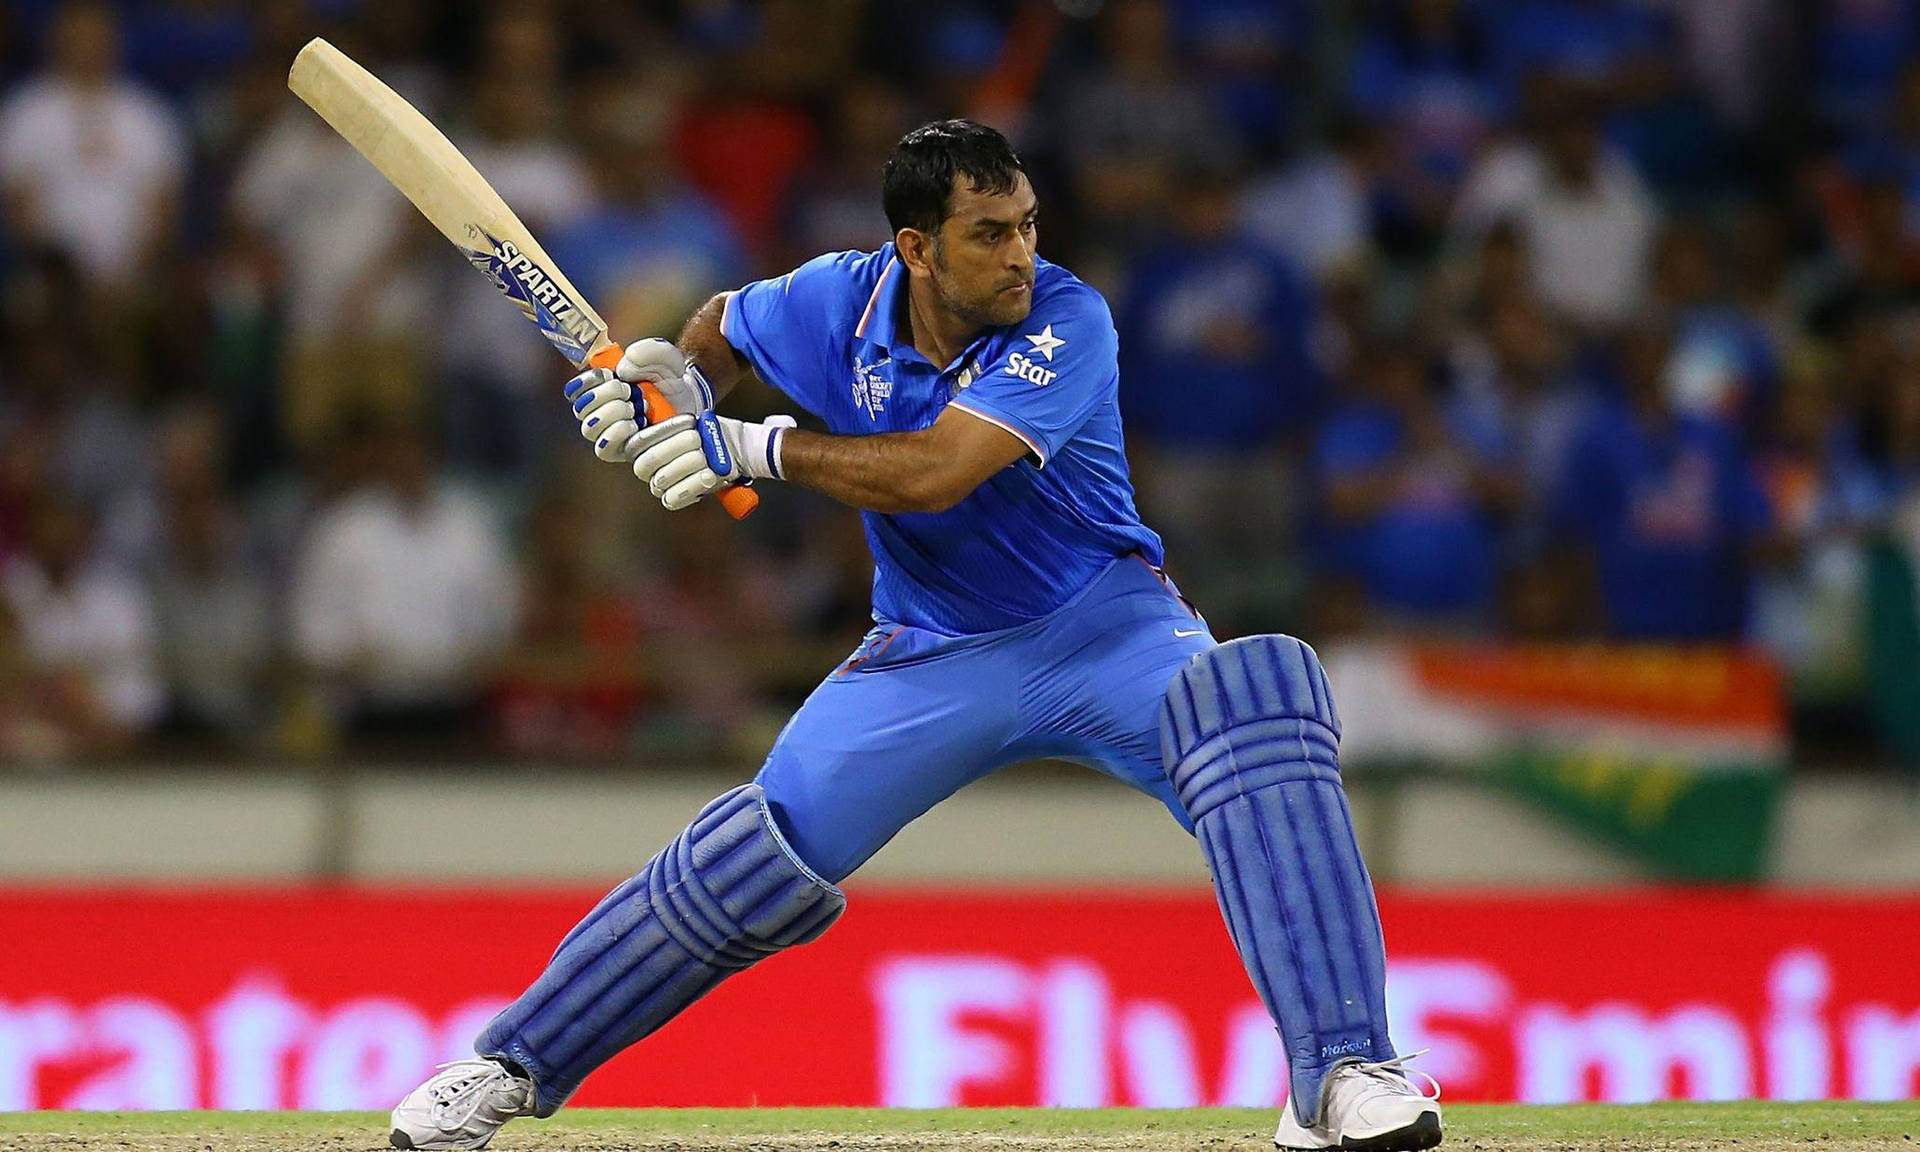 Ms Dhoni Wide Batting Stance Background